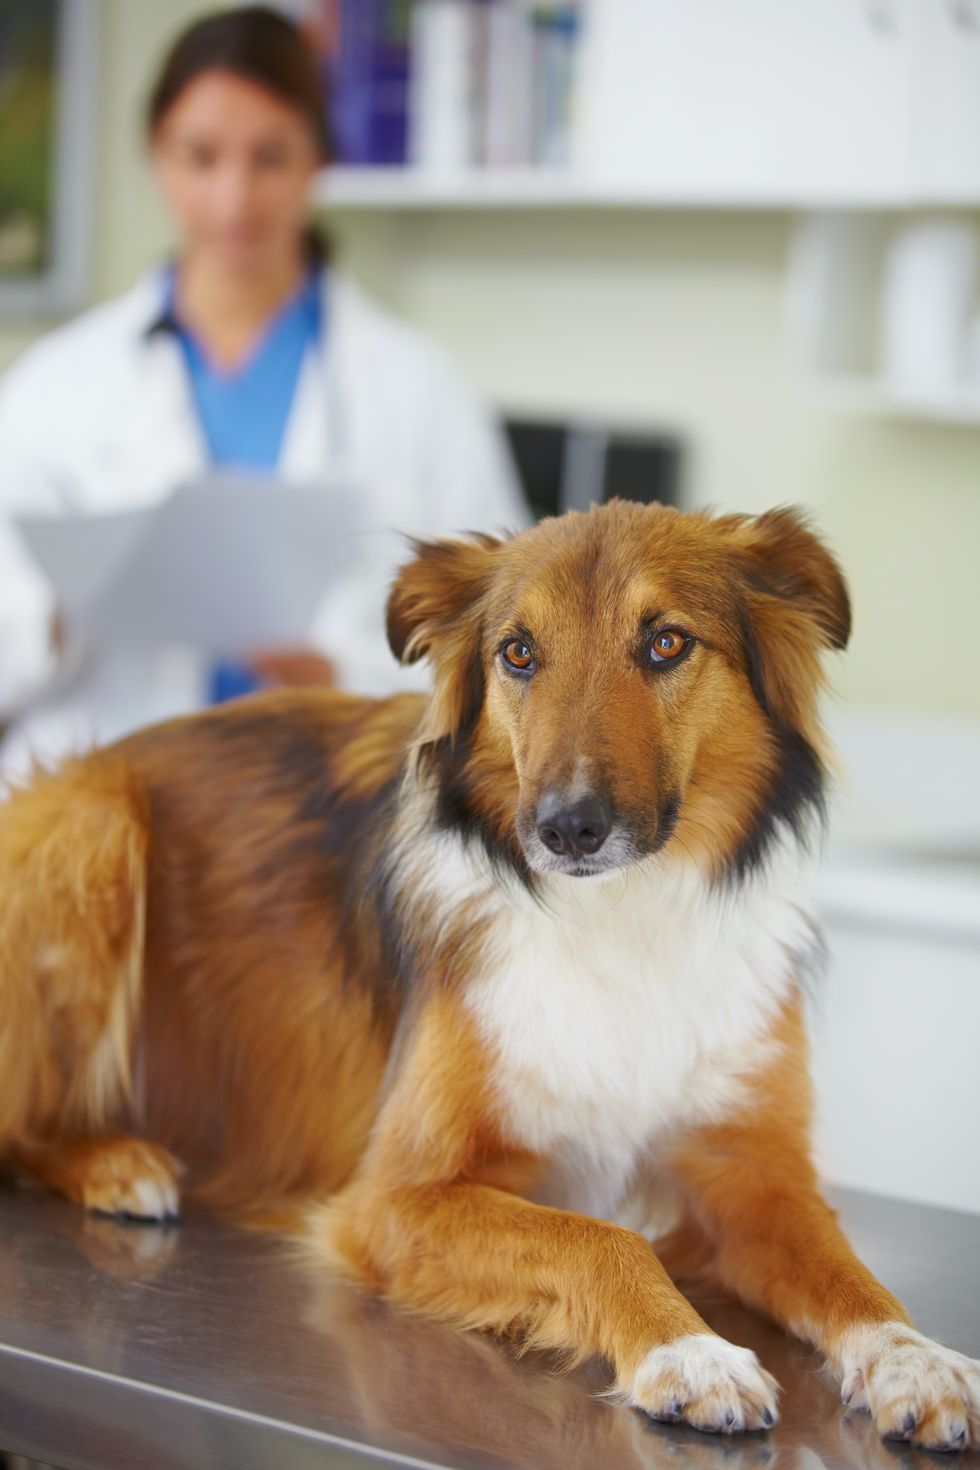 The 9 Most Expensive Pet Treatments Revealed